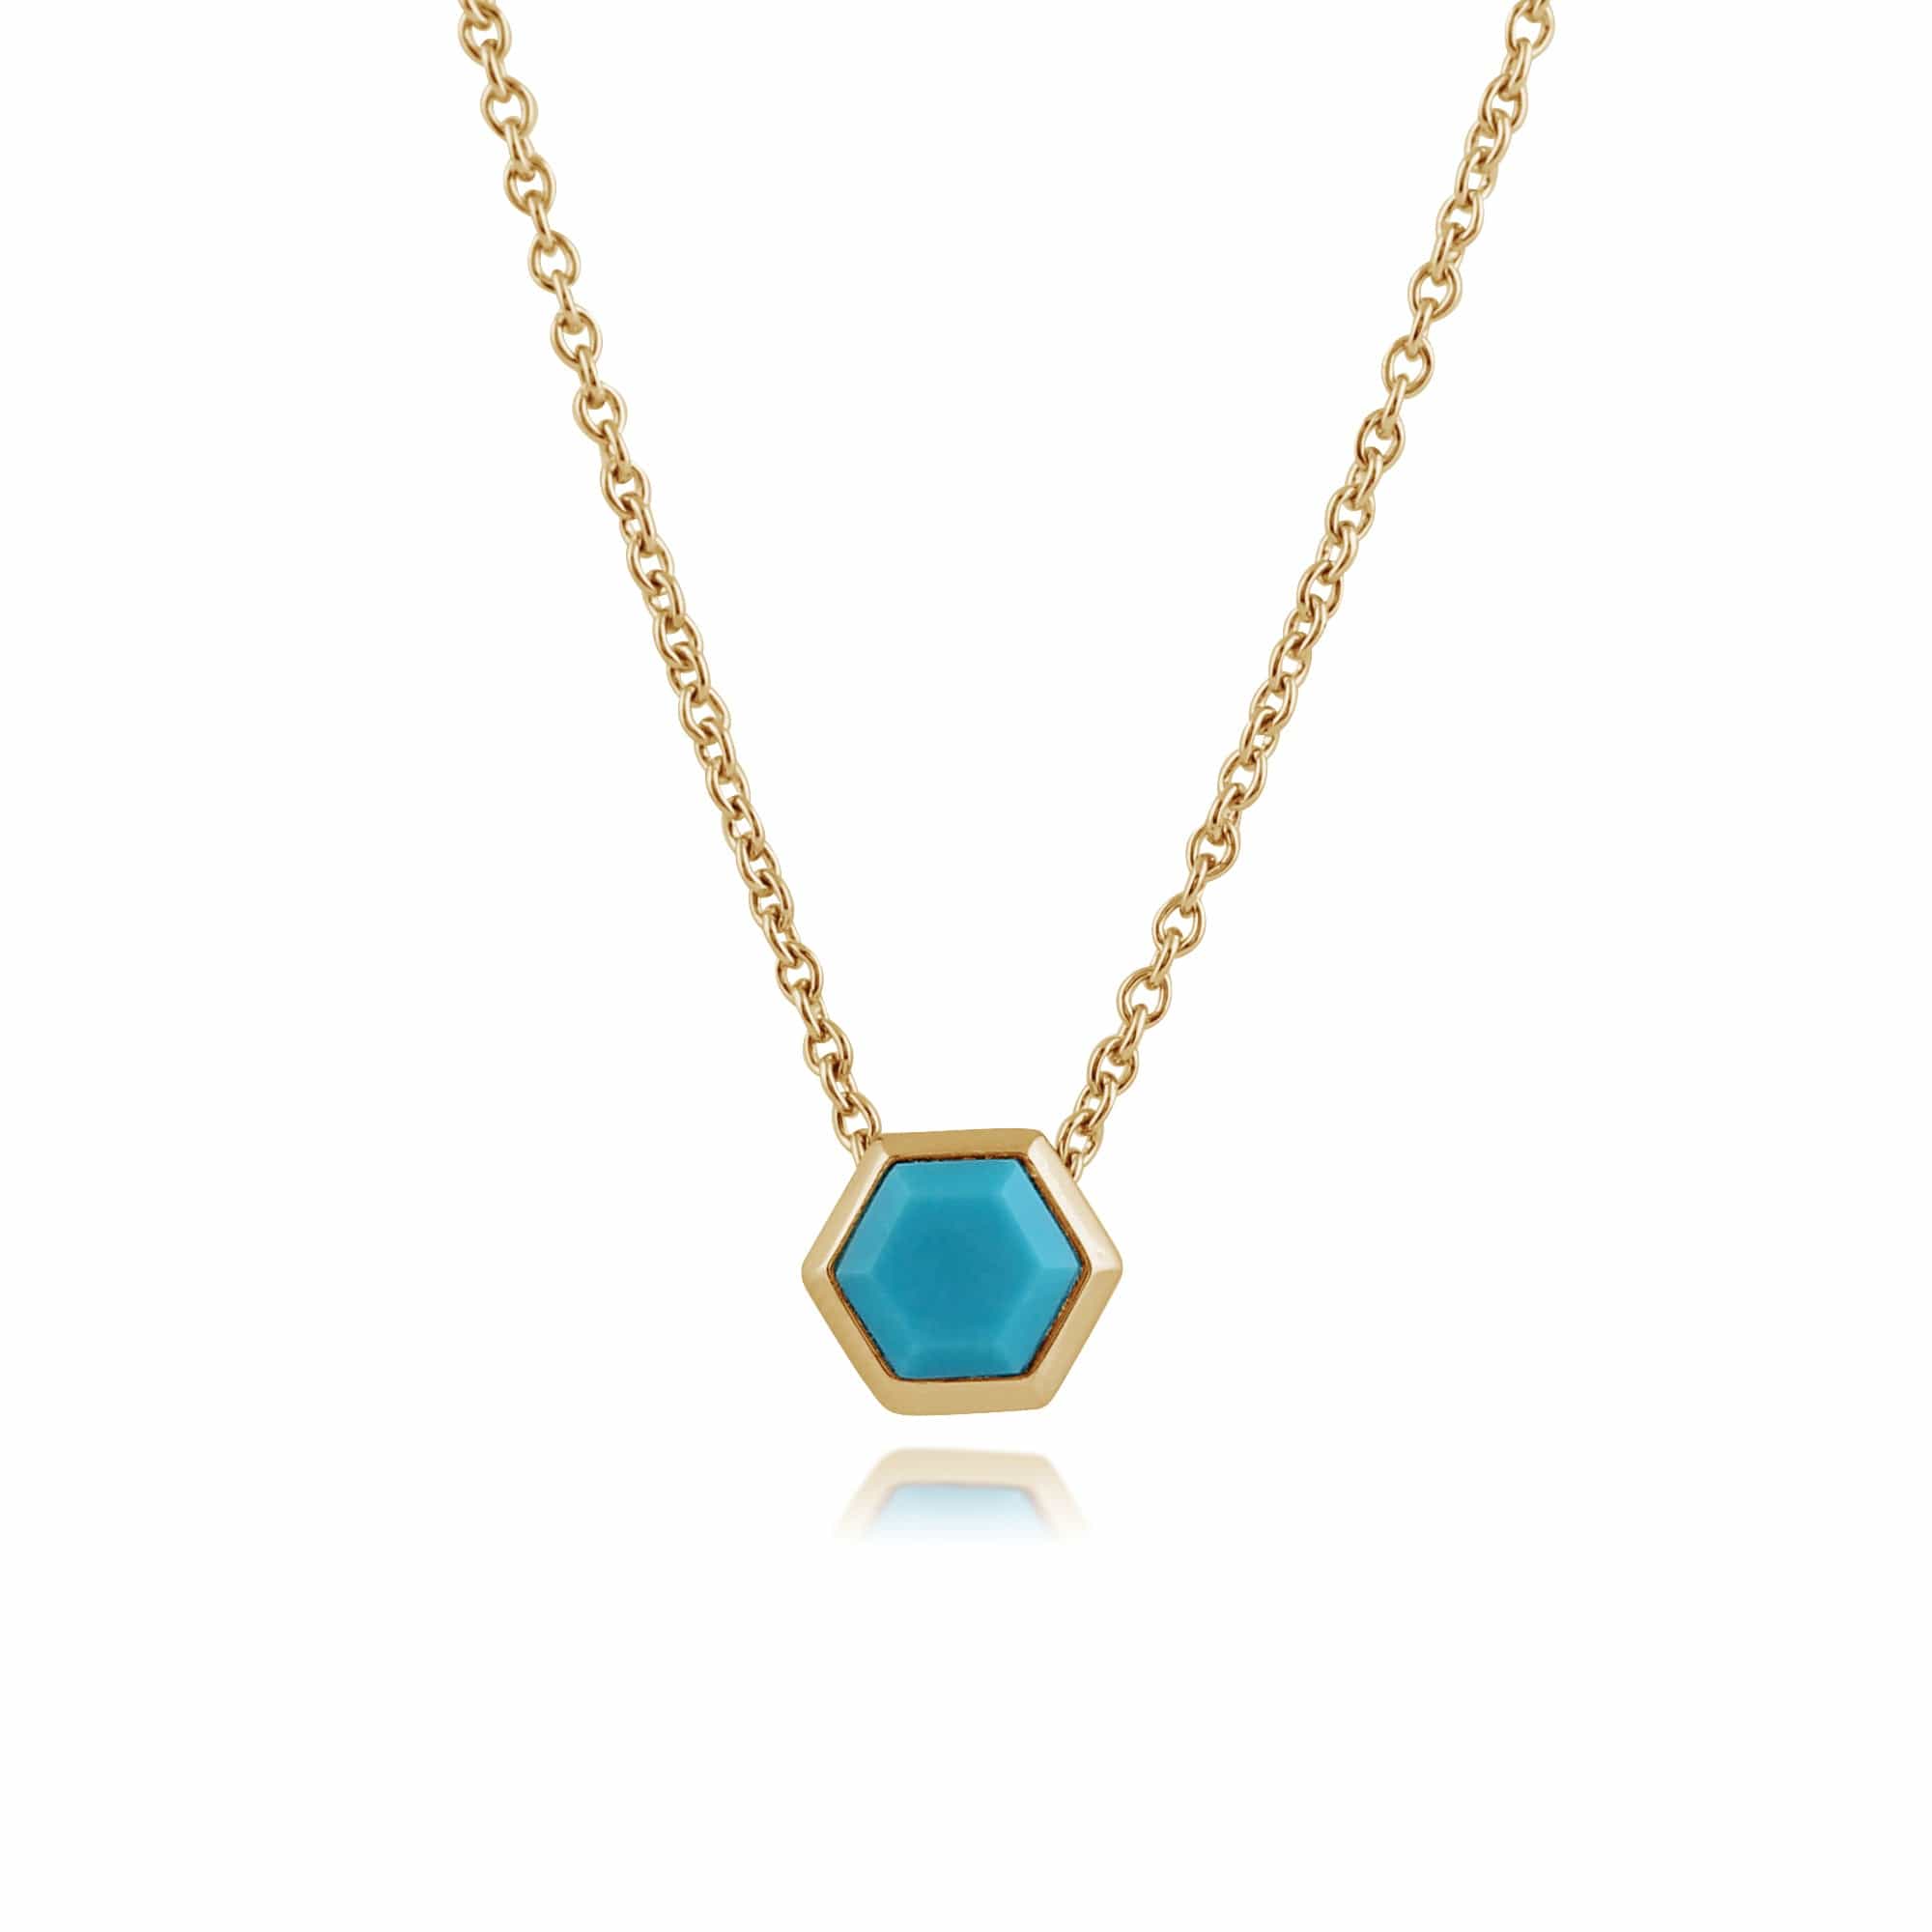 Geometric Hexagon Turquoise Necklace in Gold Plated  Silver - Gemondo